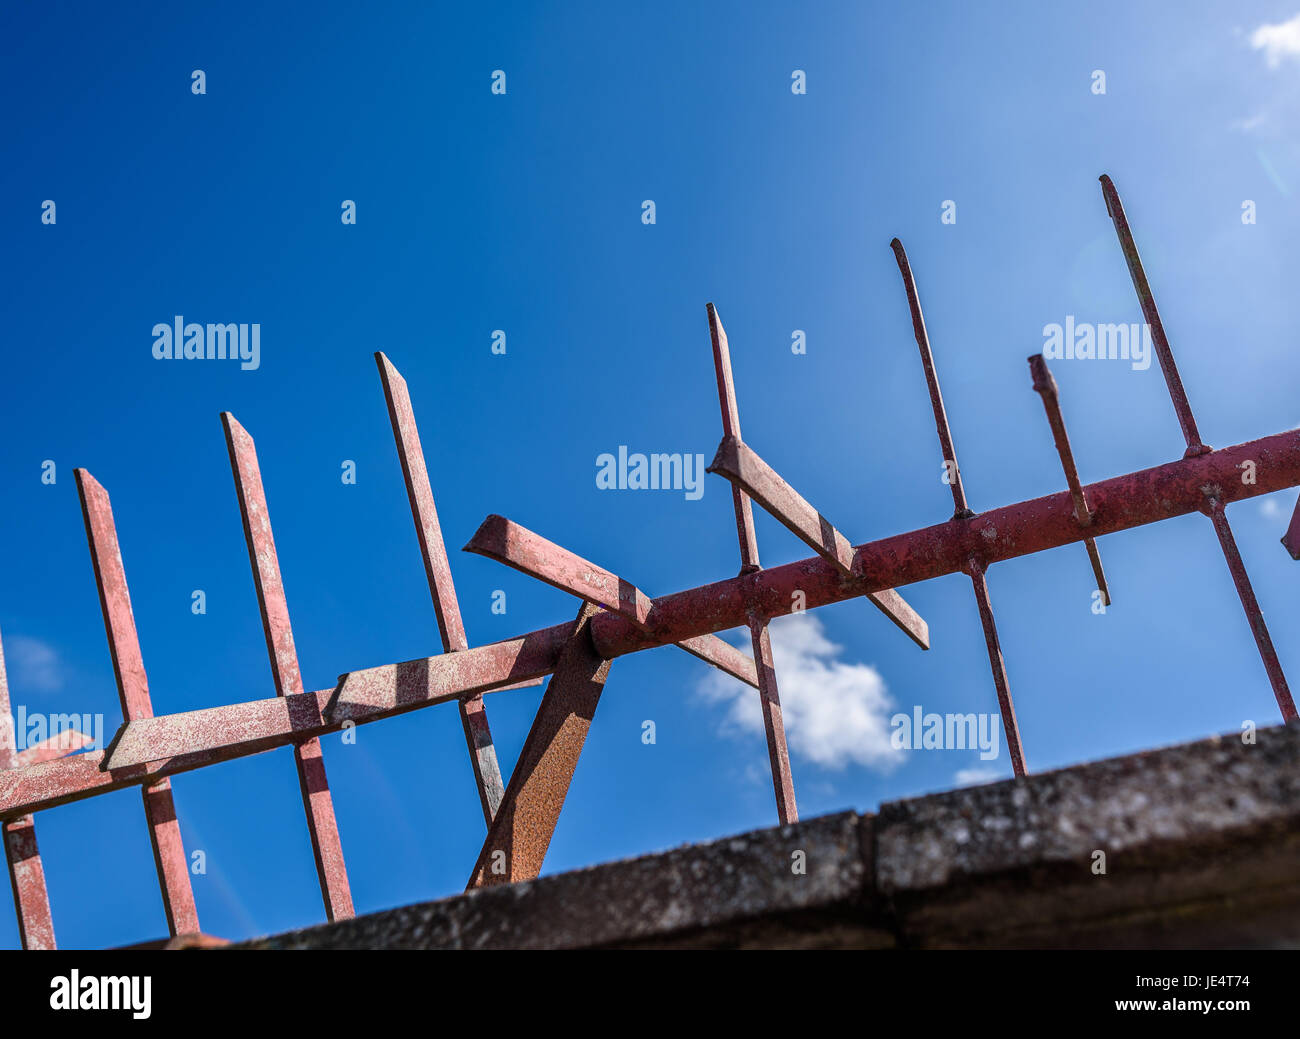 Red metal spiked security barrier against a blue sky. Stock Photo